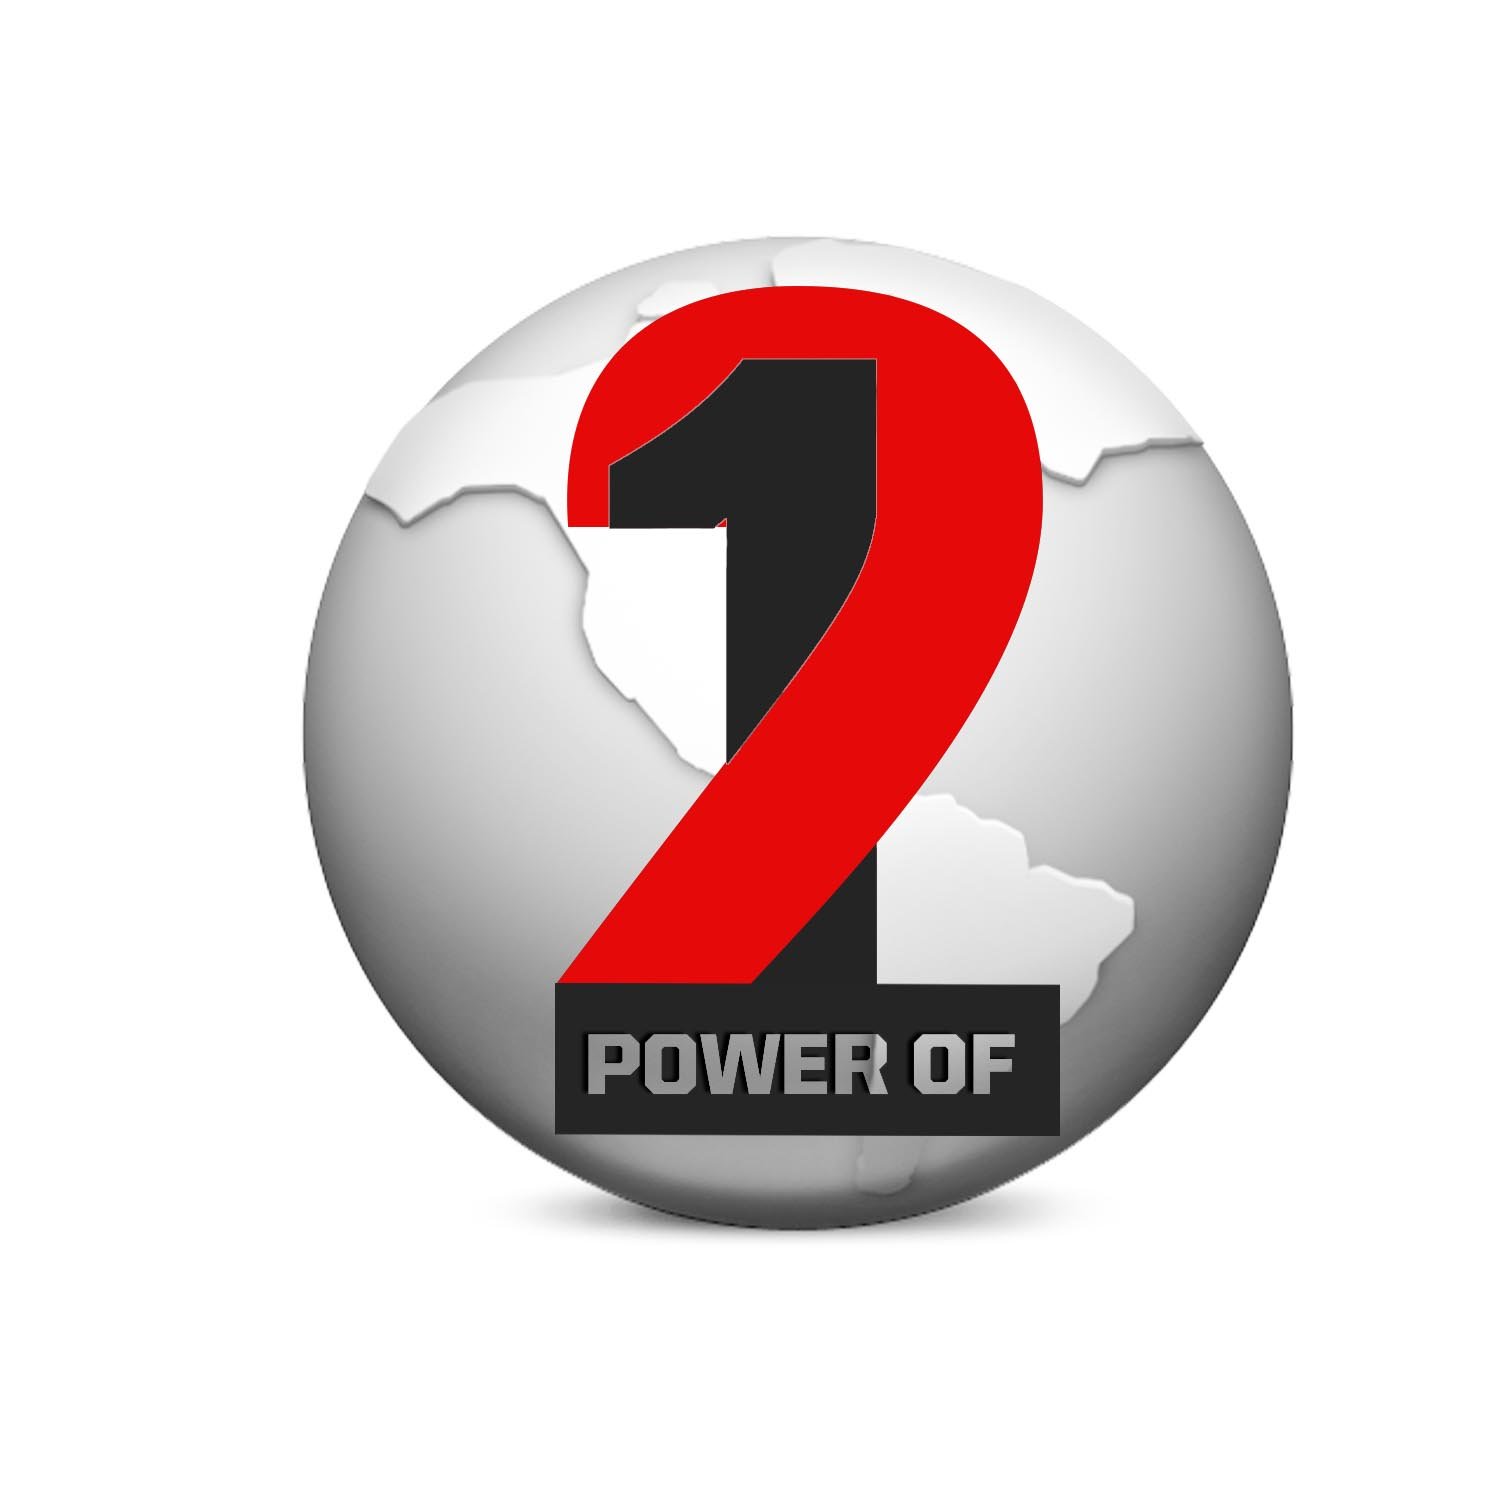 The Power of 1 or 2 Inc. is a 501(c)(3) Non Profit Organization committed to empowering, educating, and enhancing the lives of children and youth. #powerof1or2